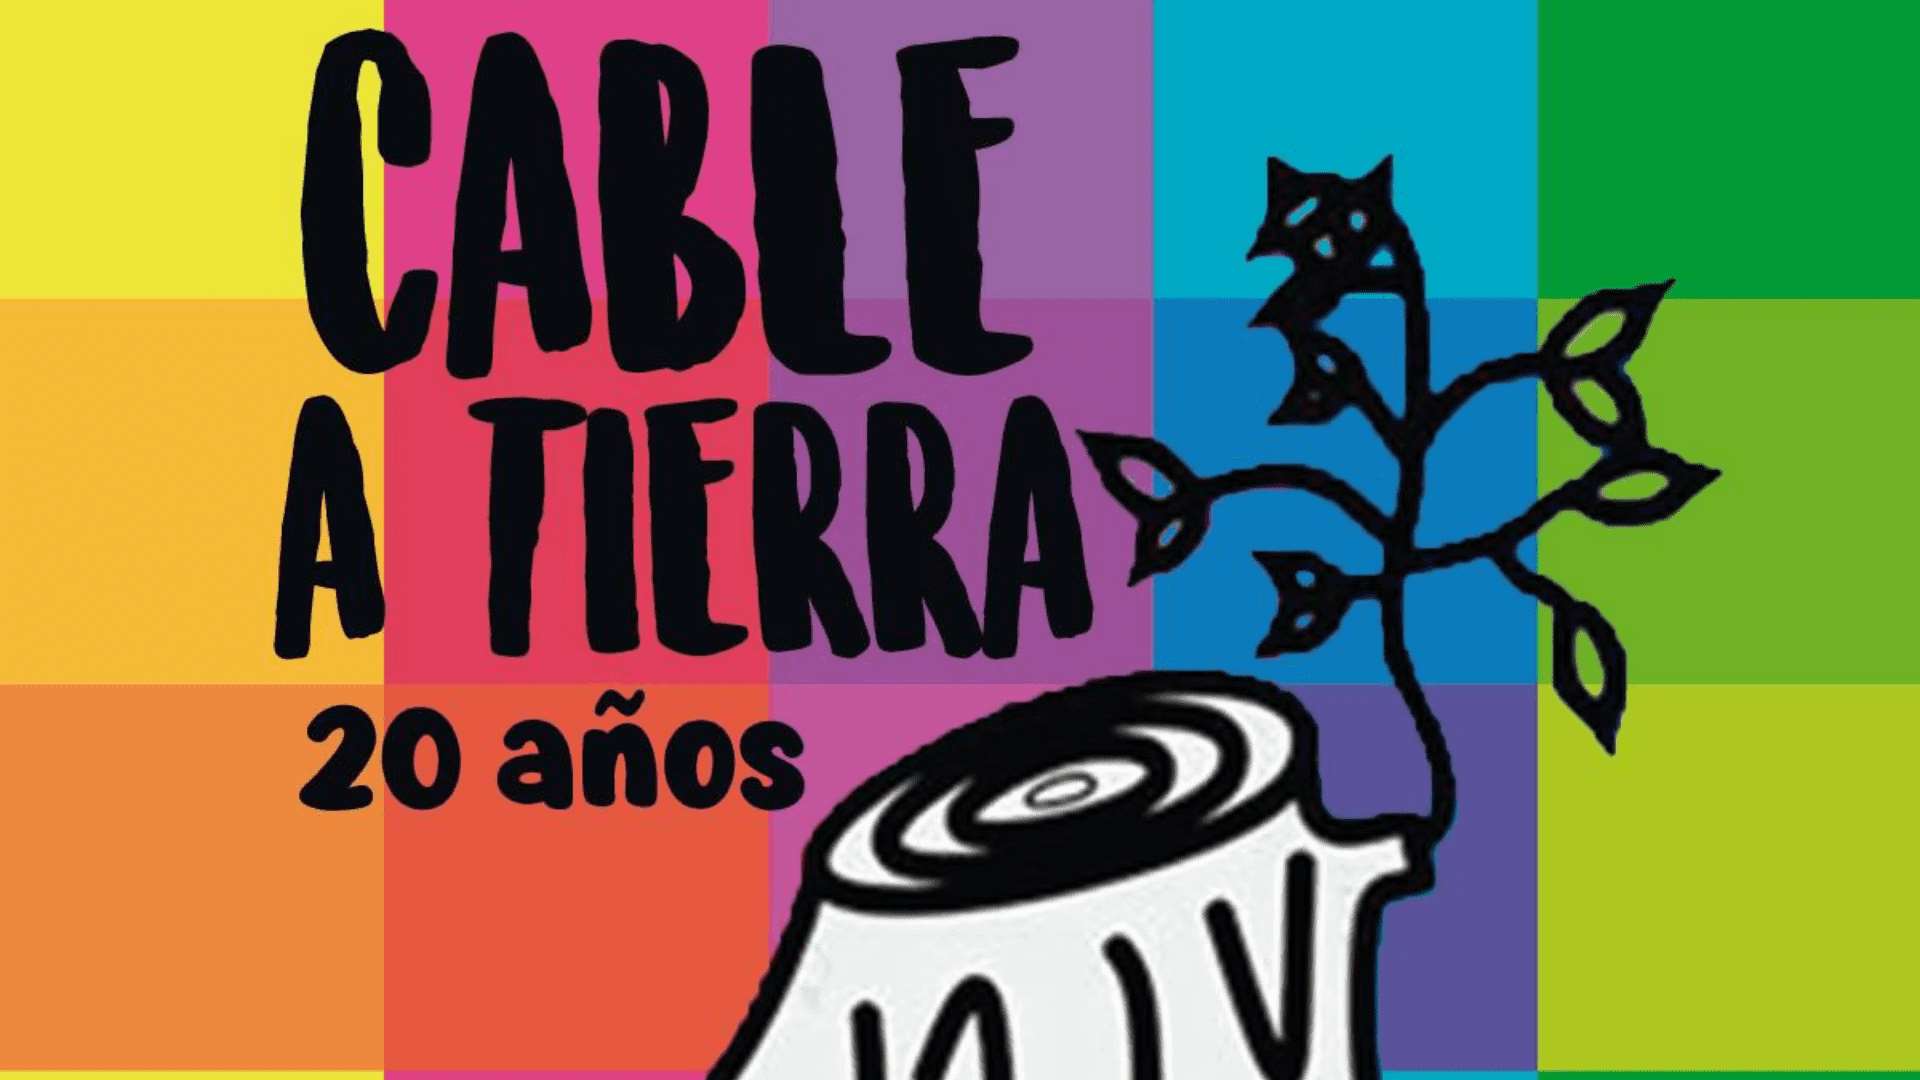 Cable a Tierra vuelve a clases